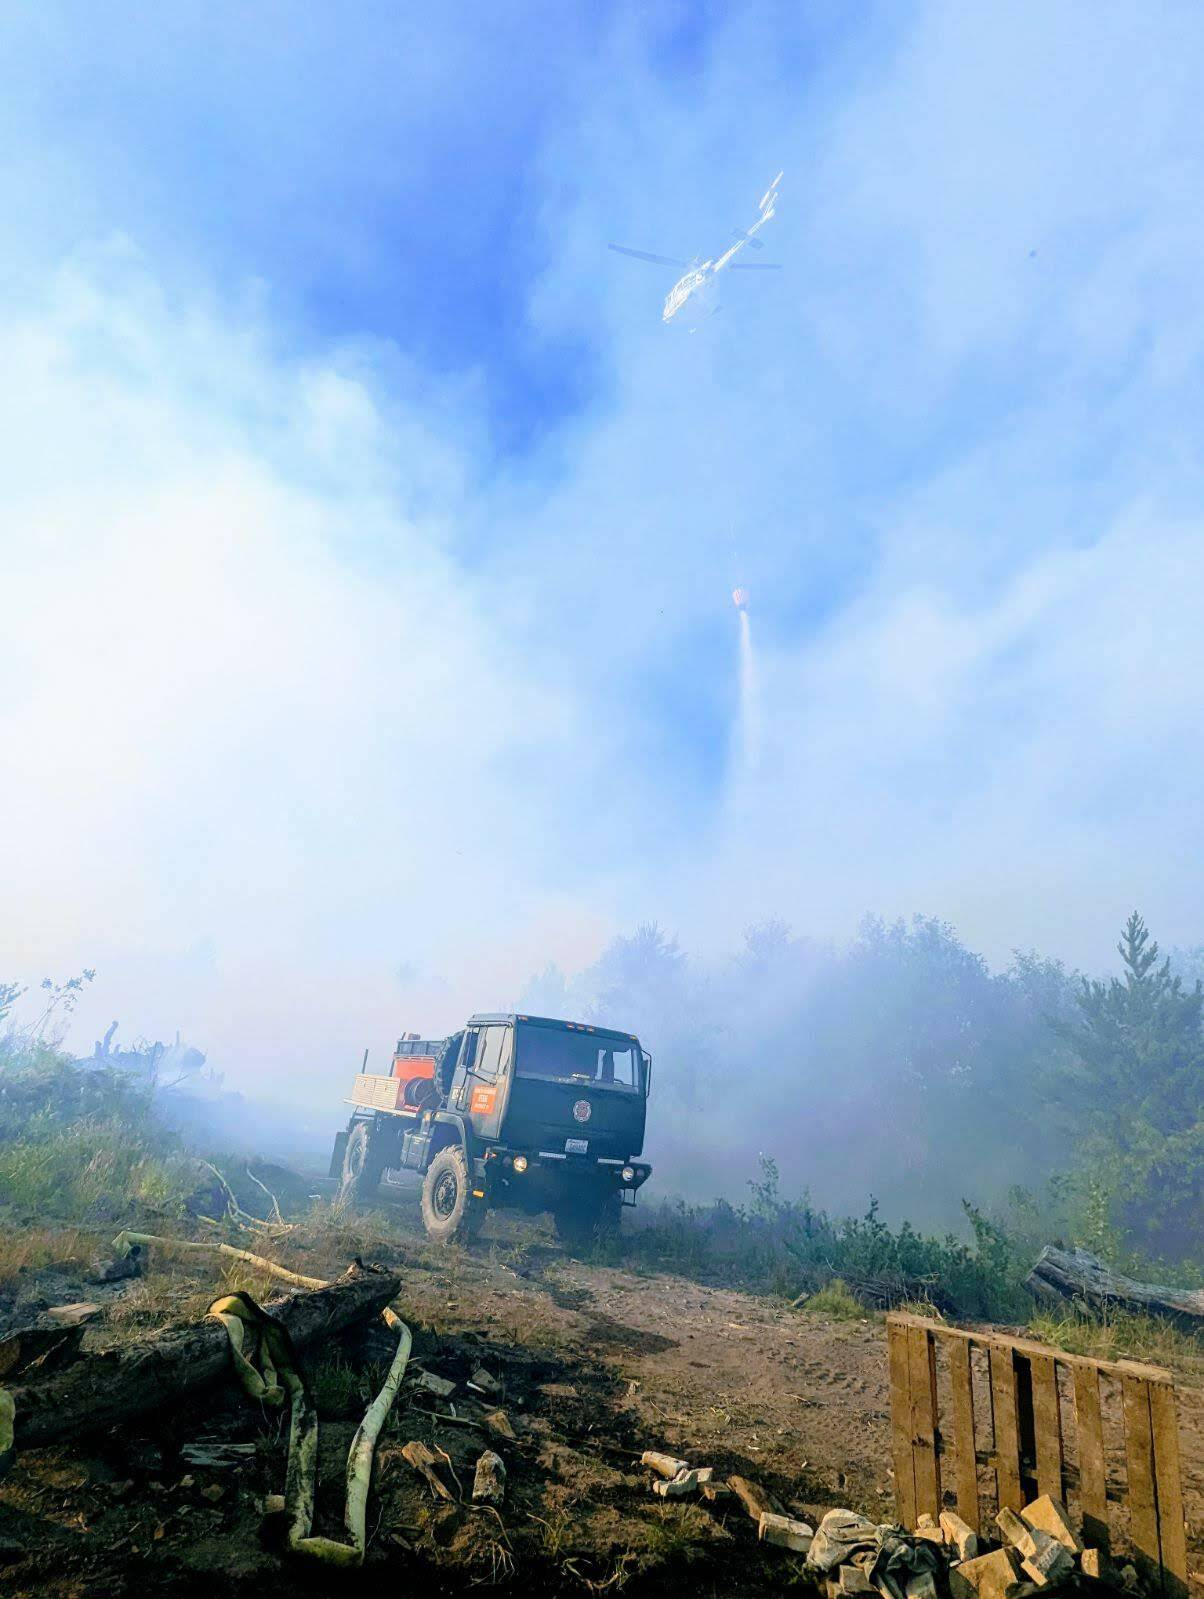 Brush rigs and firefighting helicopters helped fight a wildfire near Pacific Beach on Sunday, July 23. (Courtesy photo / Grays Harbor Fire District 7)